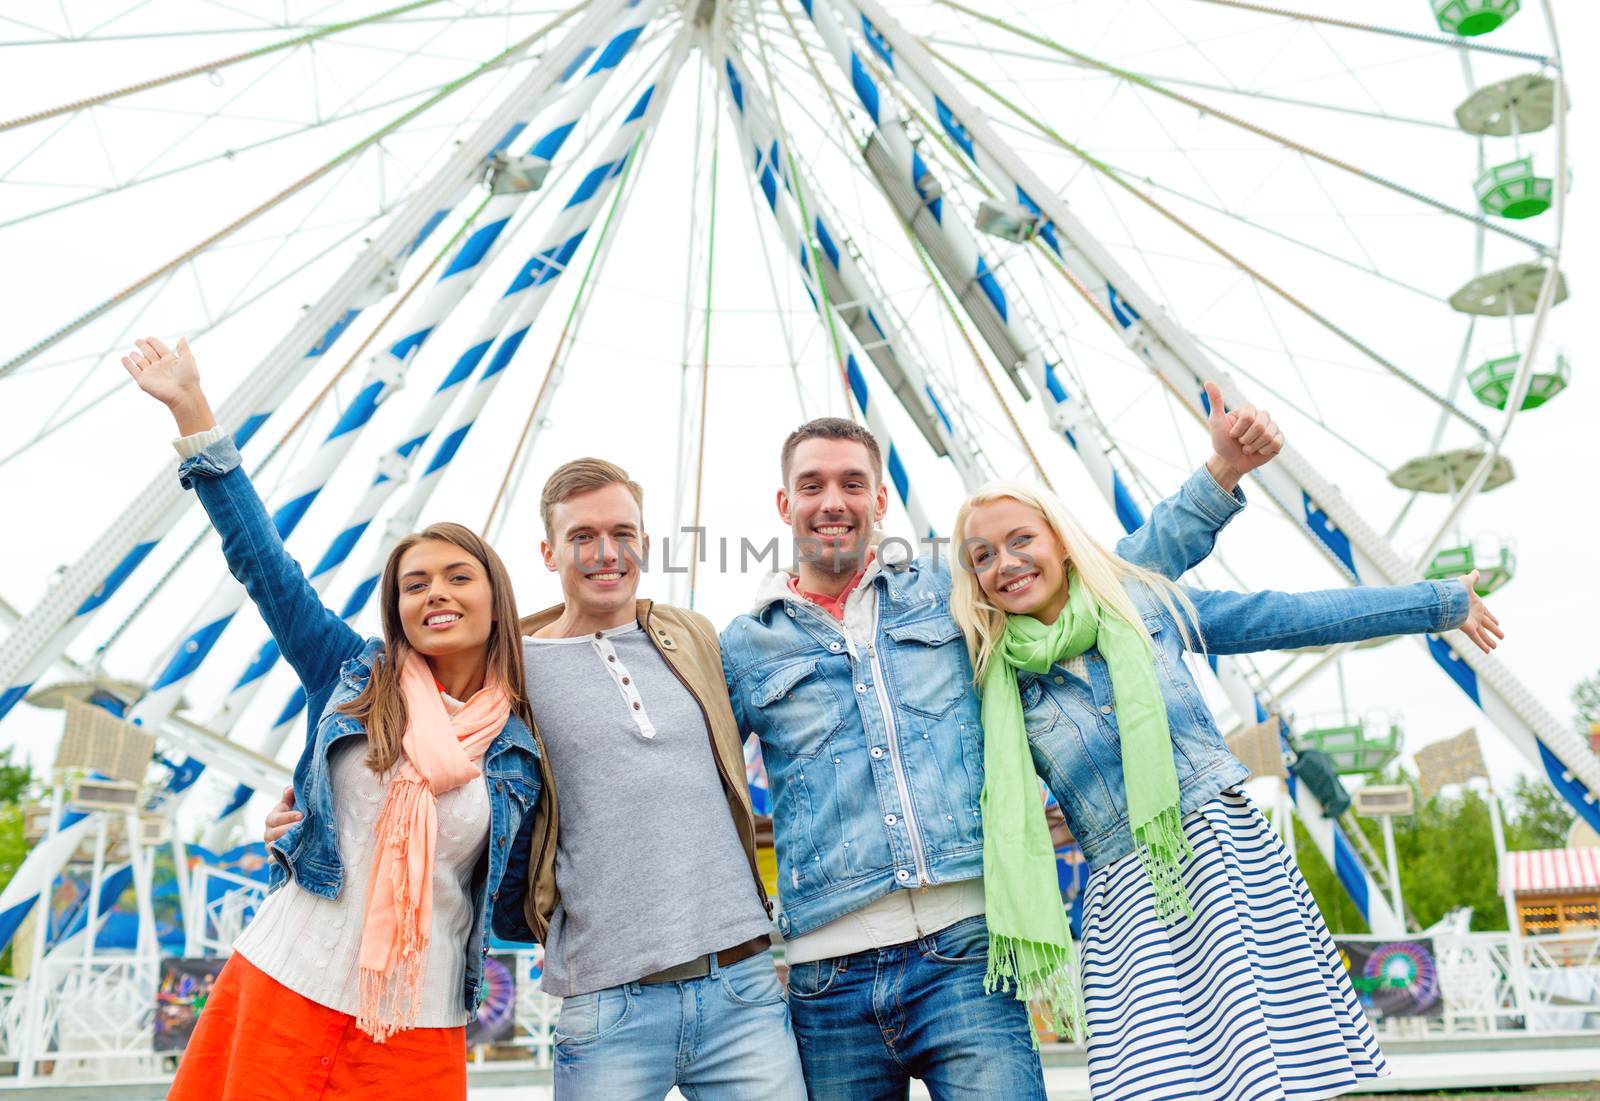 leisure, amusement park and friendship concept - group of smiling friends waving hands with ferris wheel on the back